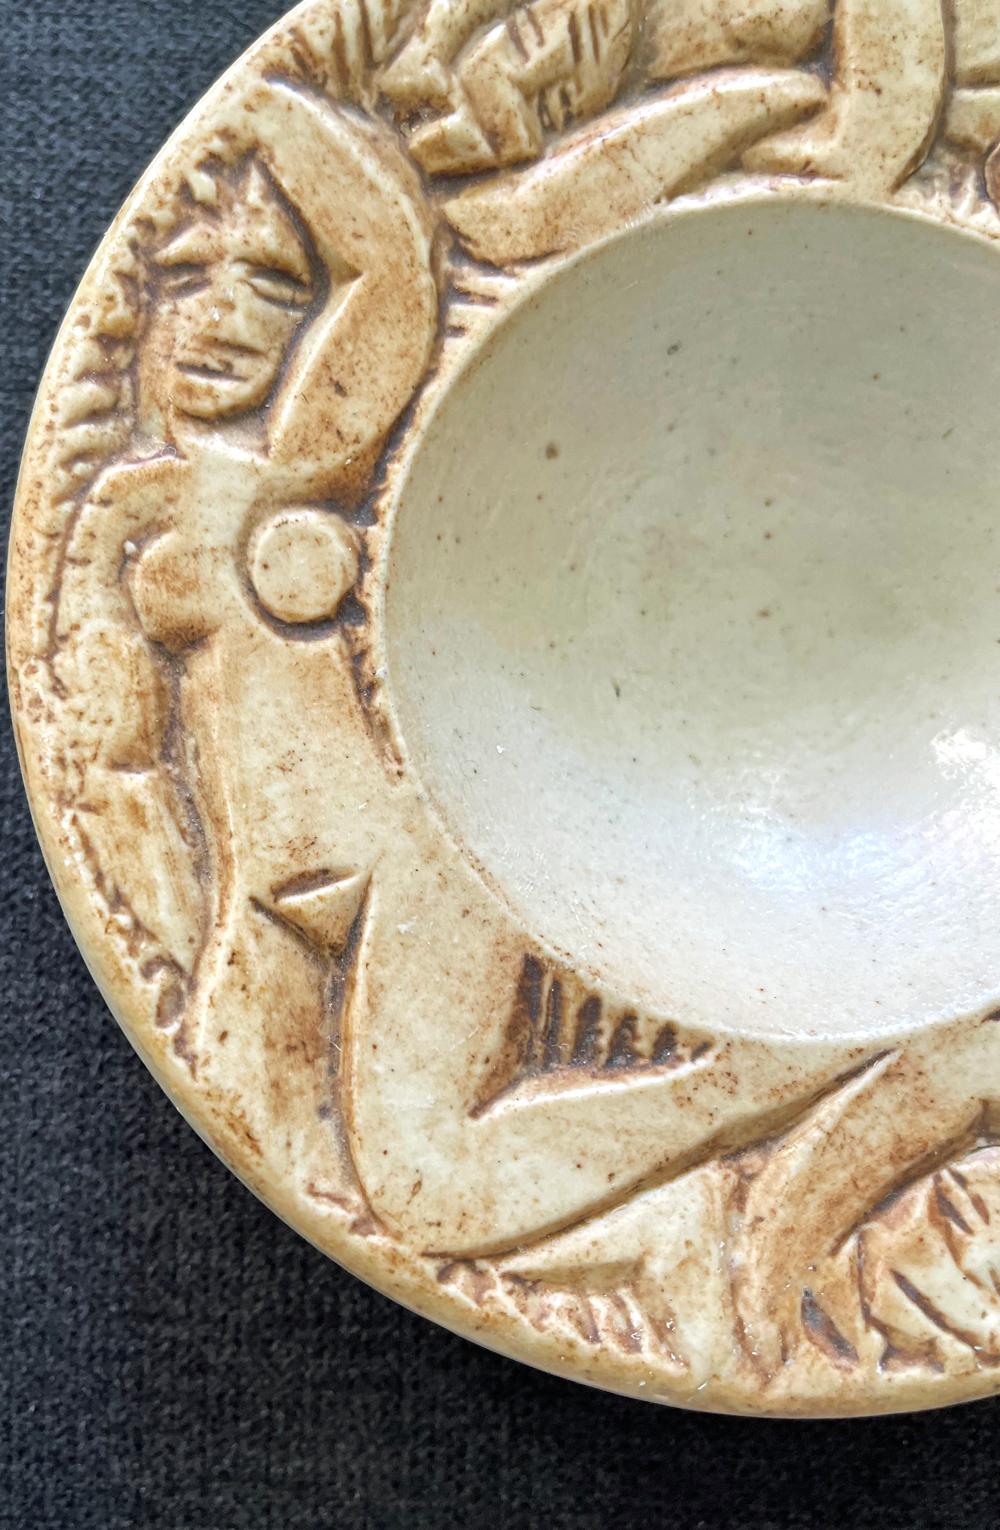 Created by Edouard Cazaux, master sculptor and ceramicist who exemplified the French Art Deco style at its best, this small ceramic bowl is ringed by three, sharply-defined female nudes. Cazaux studied at the Beaux Arts School in Sèvres as a young